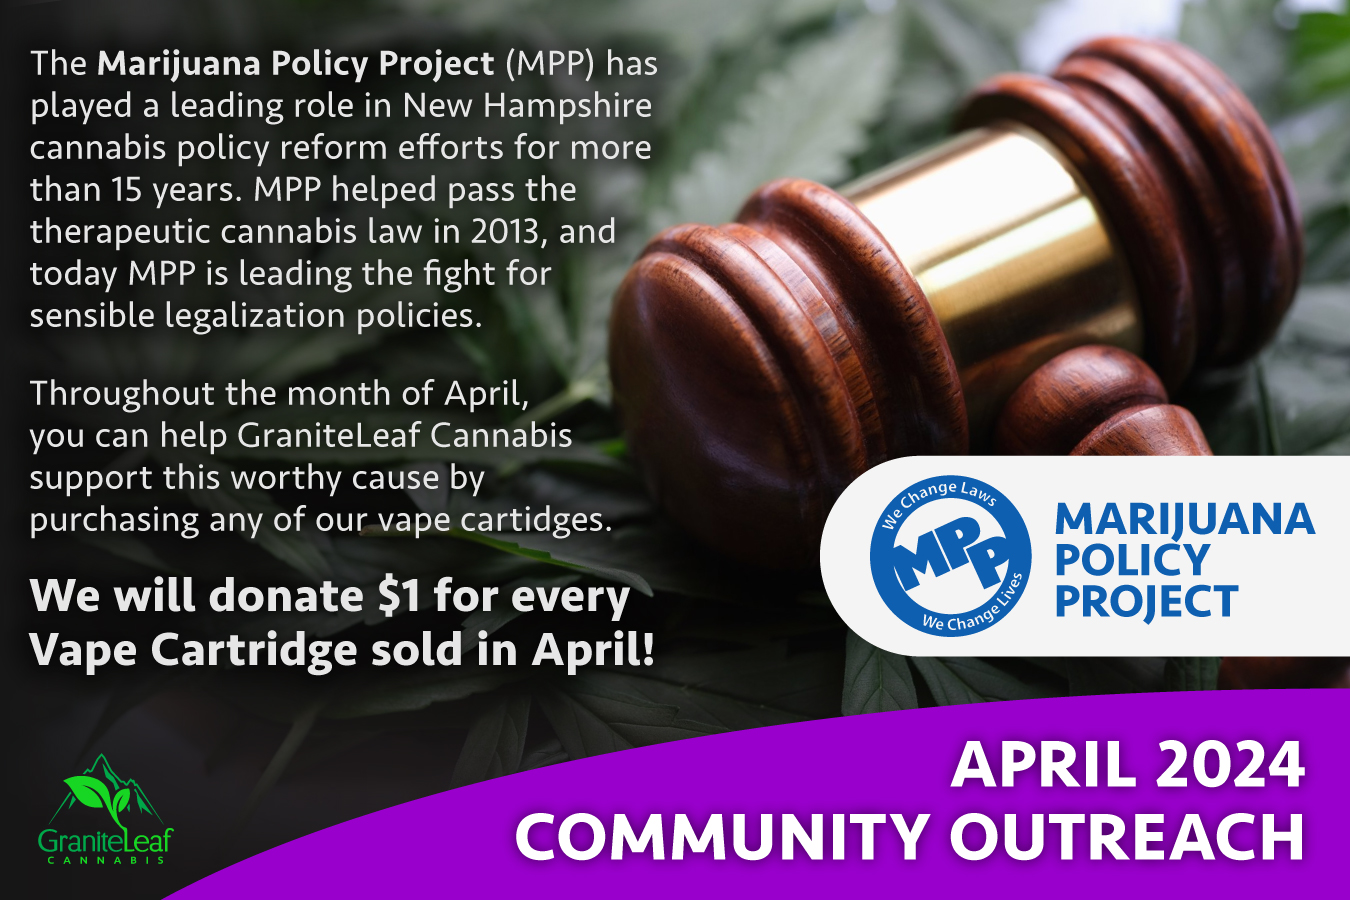 MPP is leading the fight for sensible cannabis policies